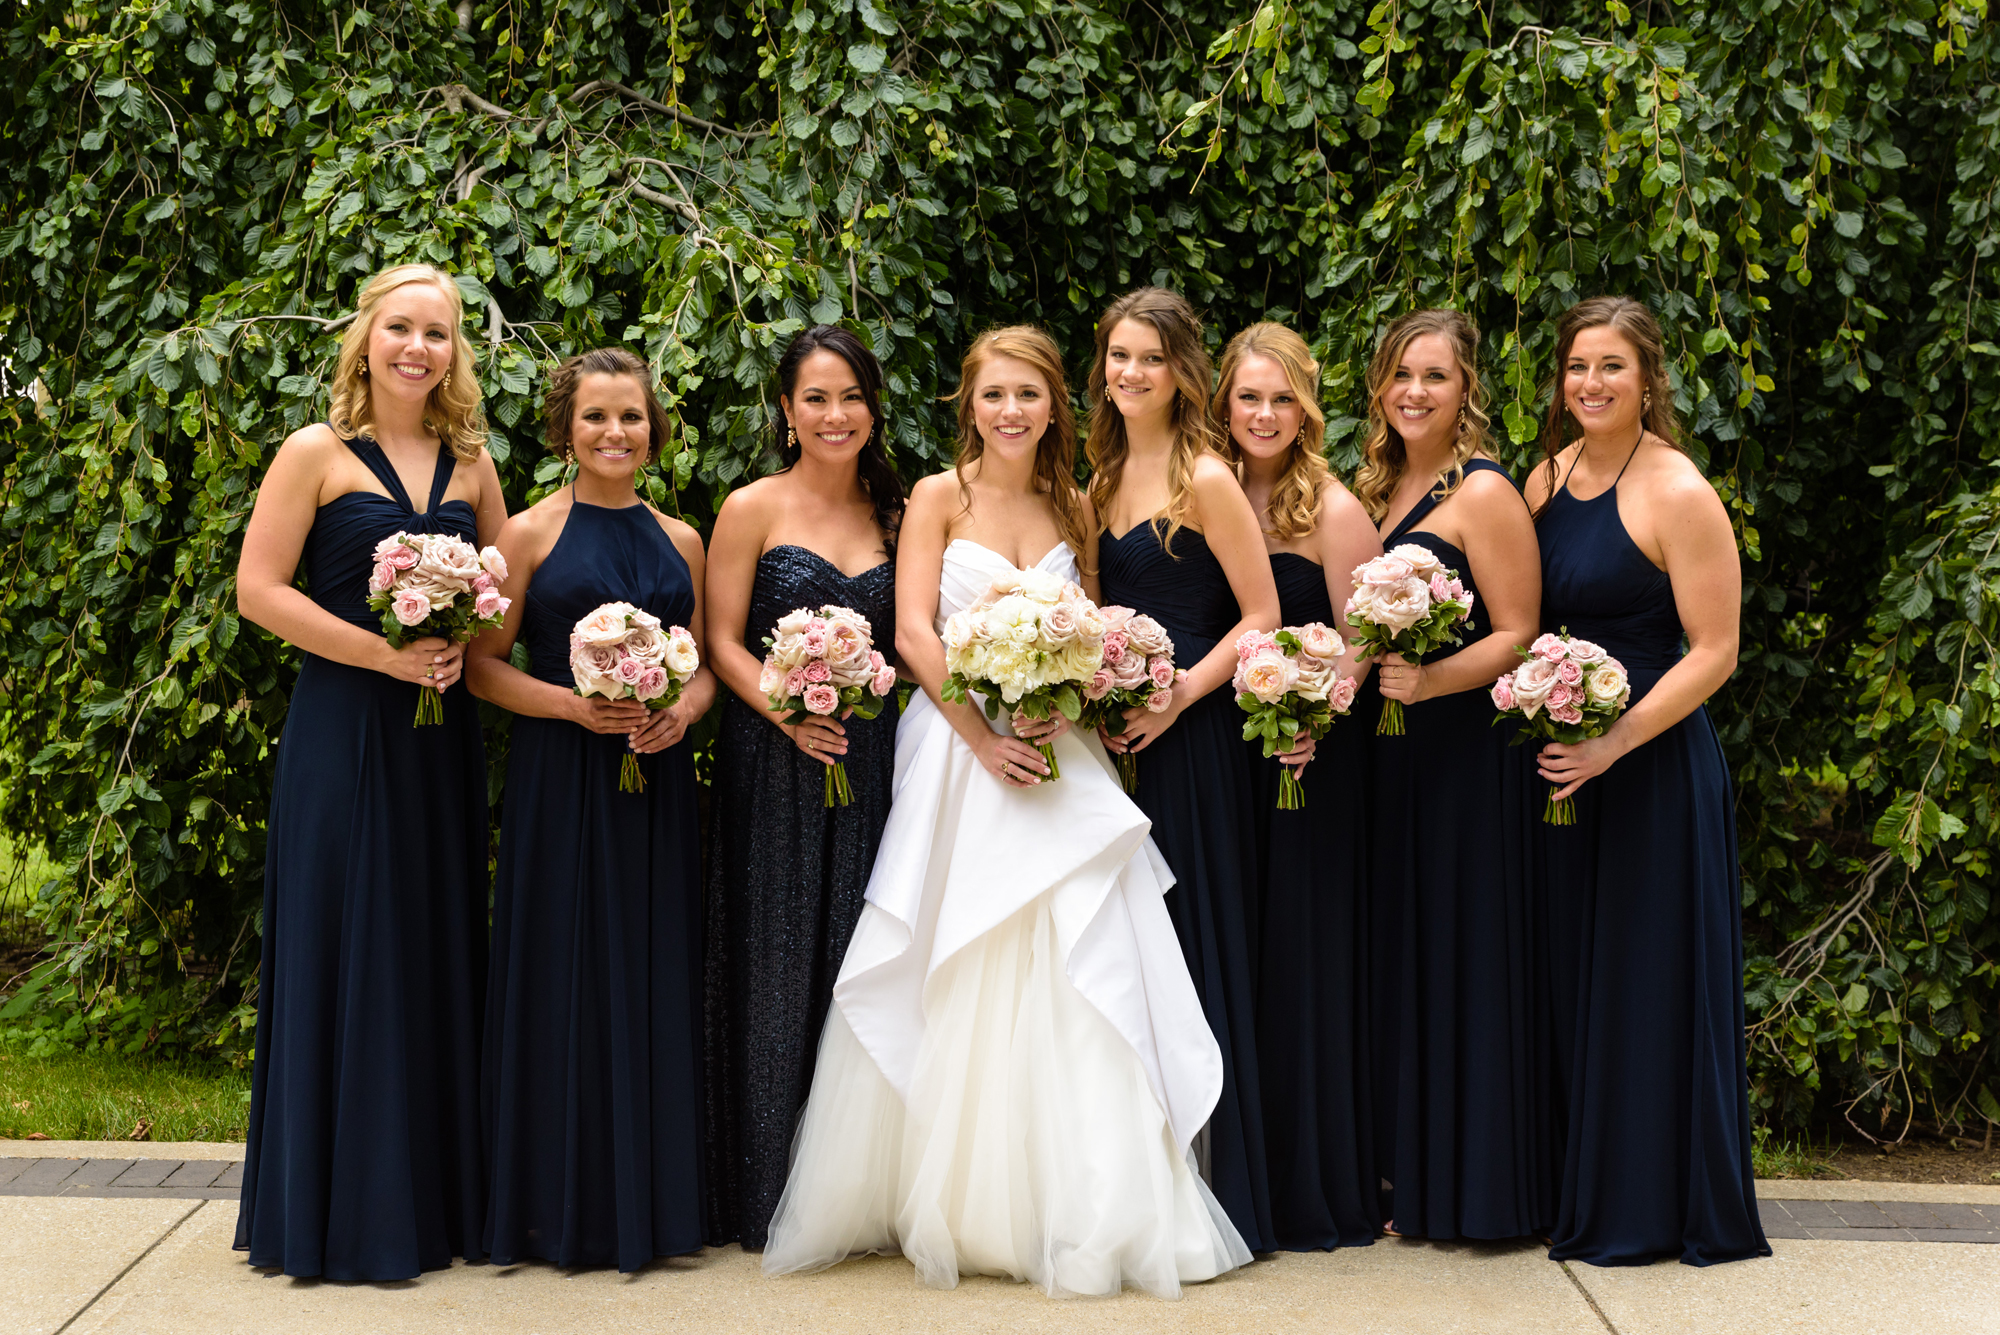 Bridesmaids in front of an exotic California inspired tree after a wedding ceremony at the Basilica of the Sacred Heart on the campus of the University of Notre Dame